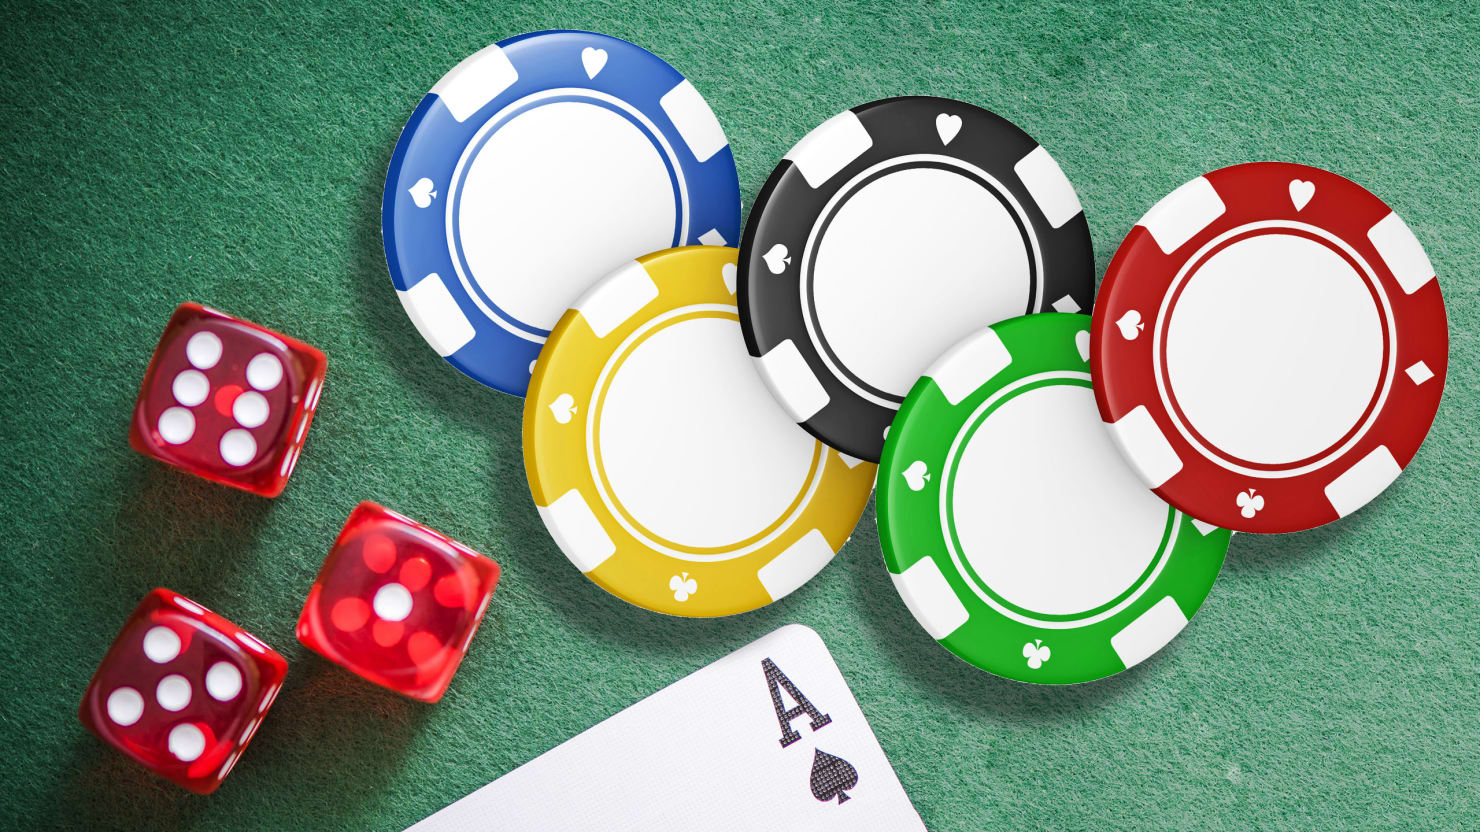 1. In a typical game of texas holdem, players are each dealt two cards face down followed by the flop (3 community cards), a turn (the fourth commu...